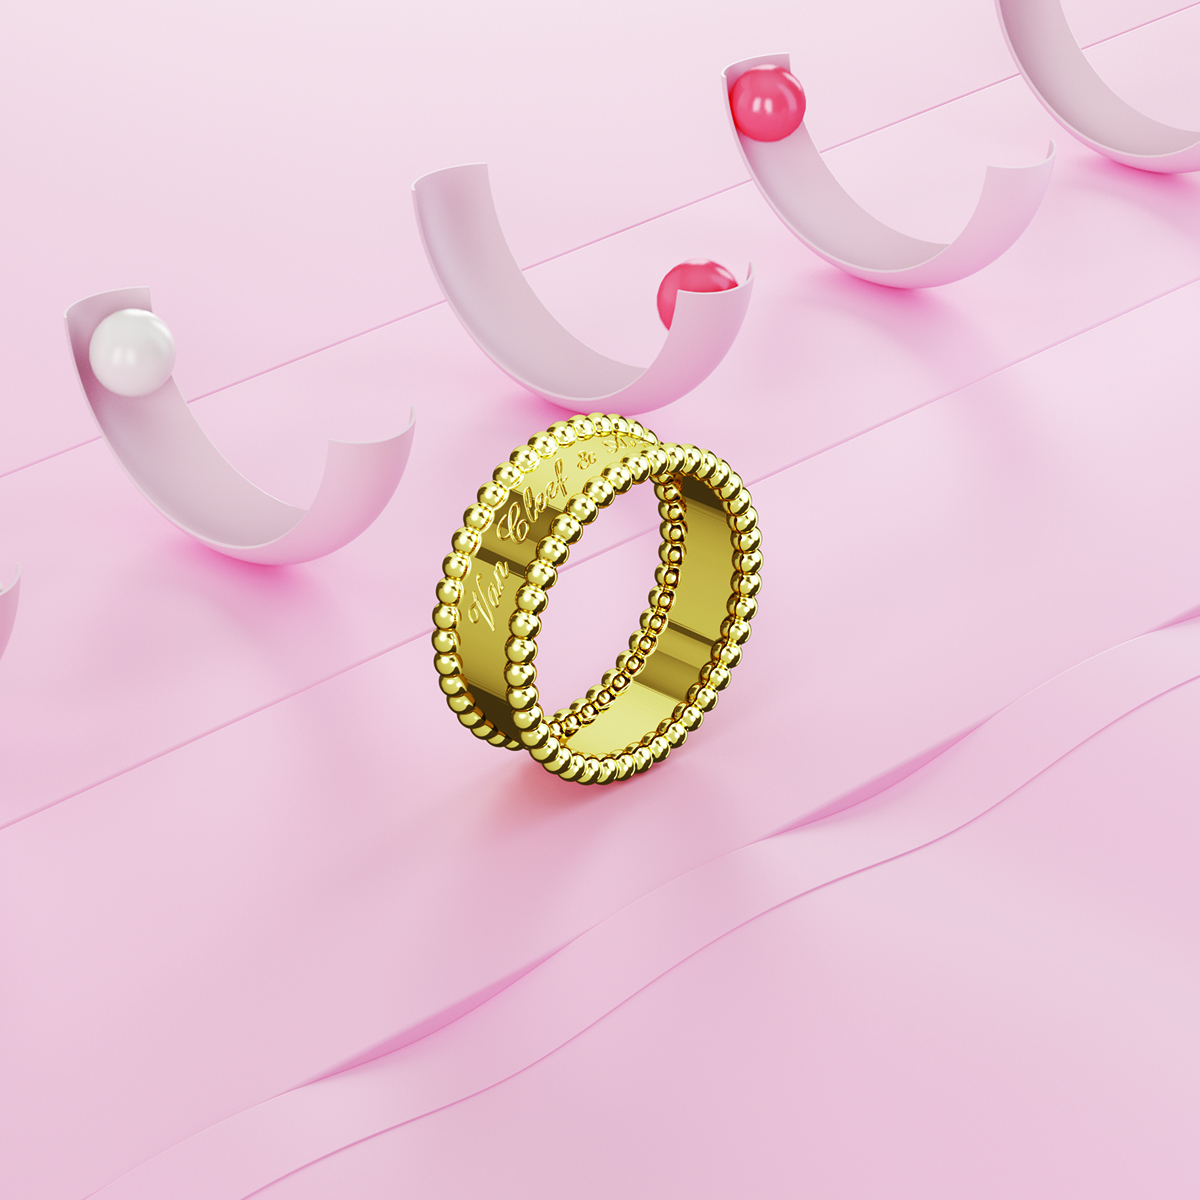 A gold ring on a pink surface with half pink circles in the background